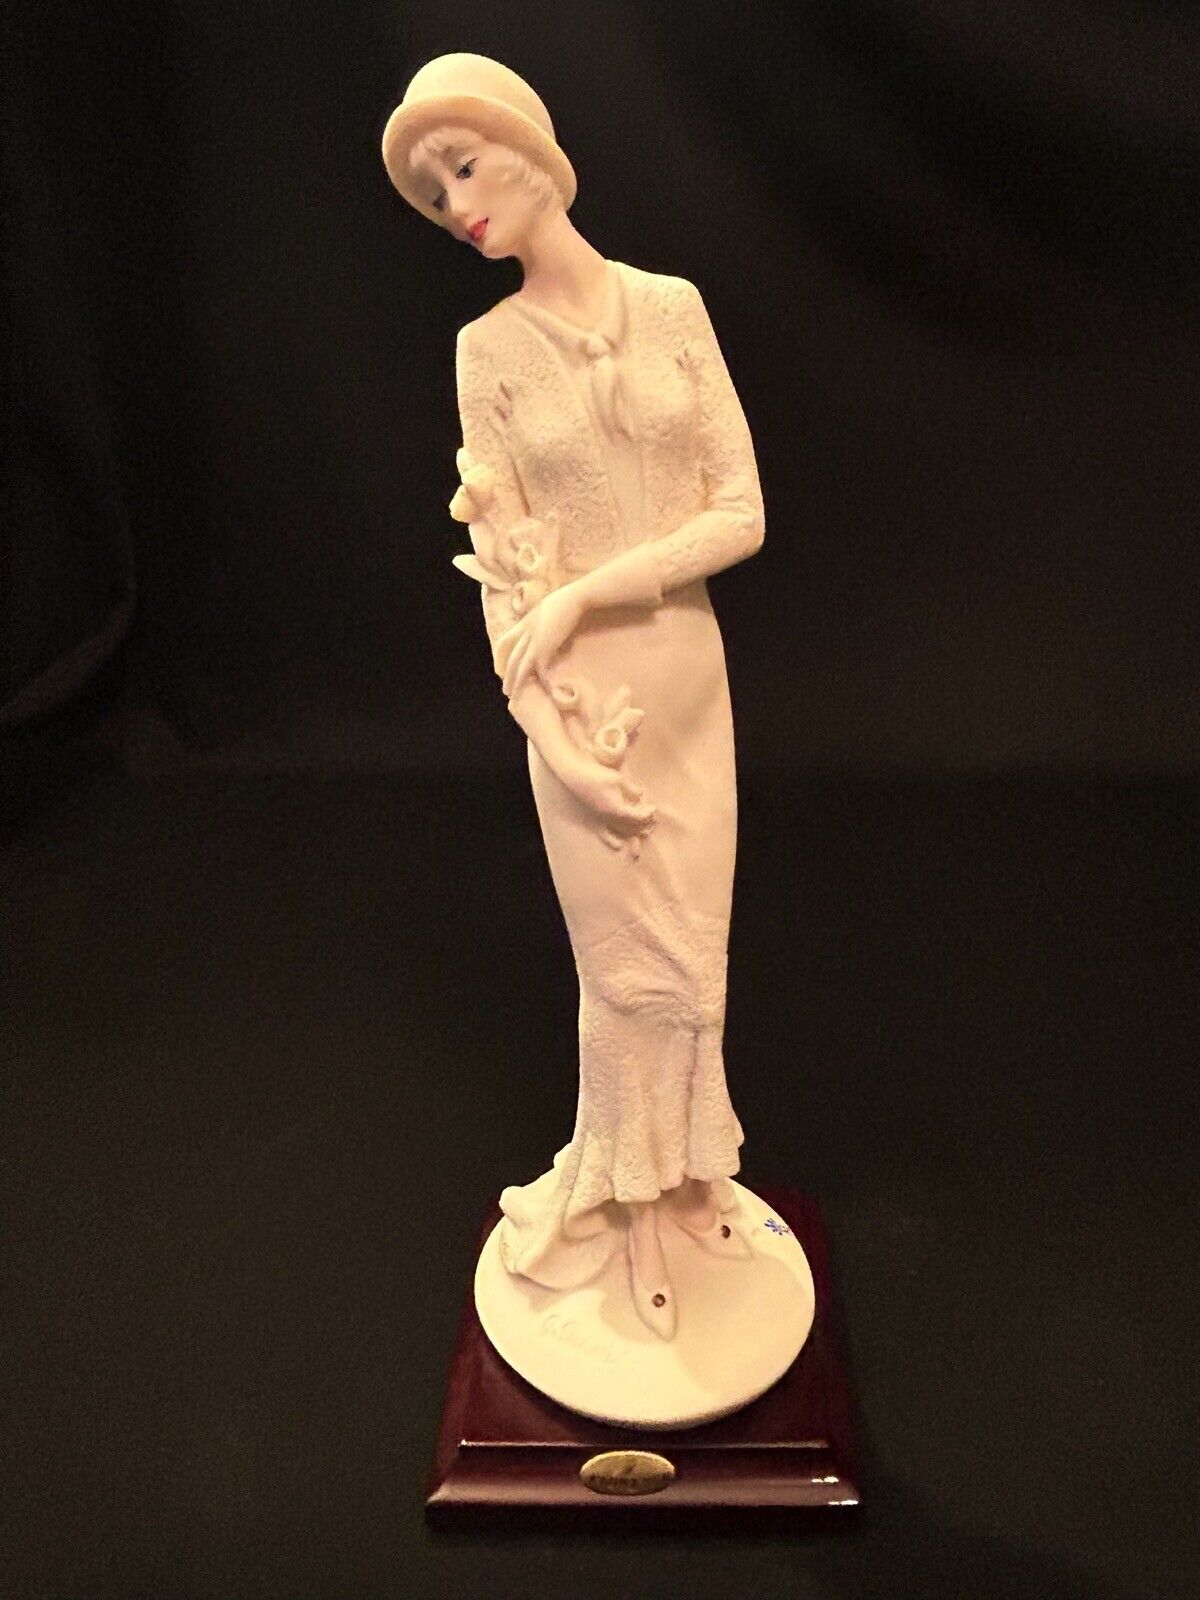 Vintage Guissepe Armani Lady with Flowers Art Deco Style Figurine Made in Italy 